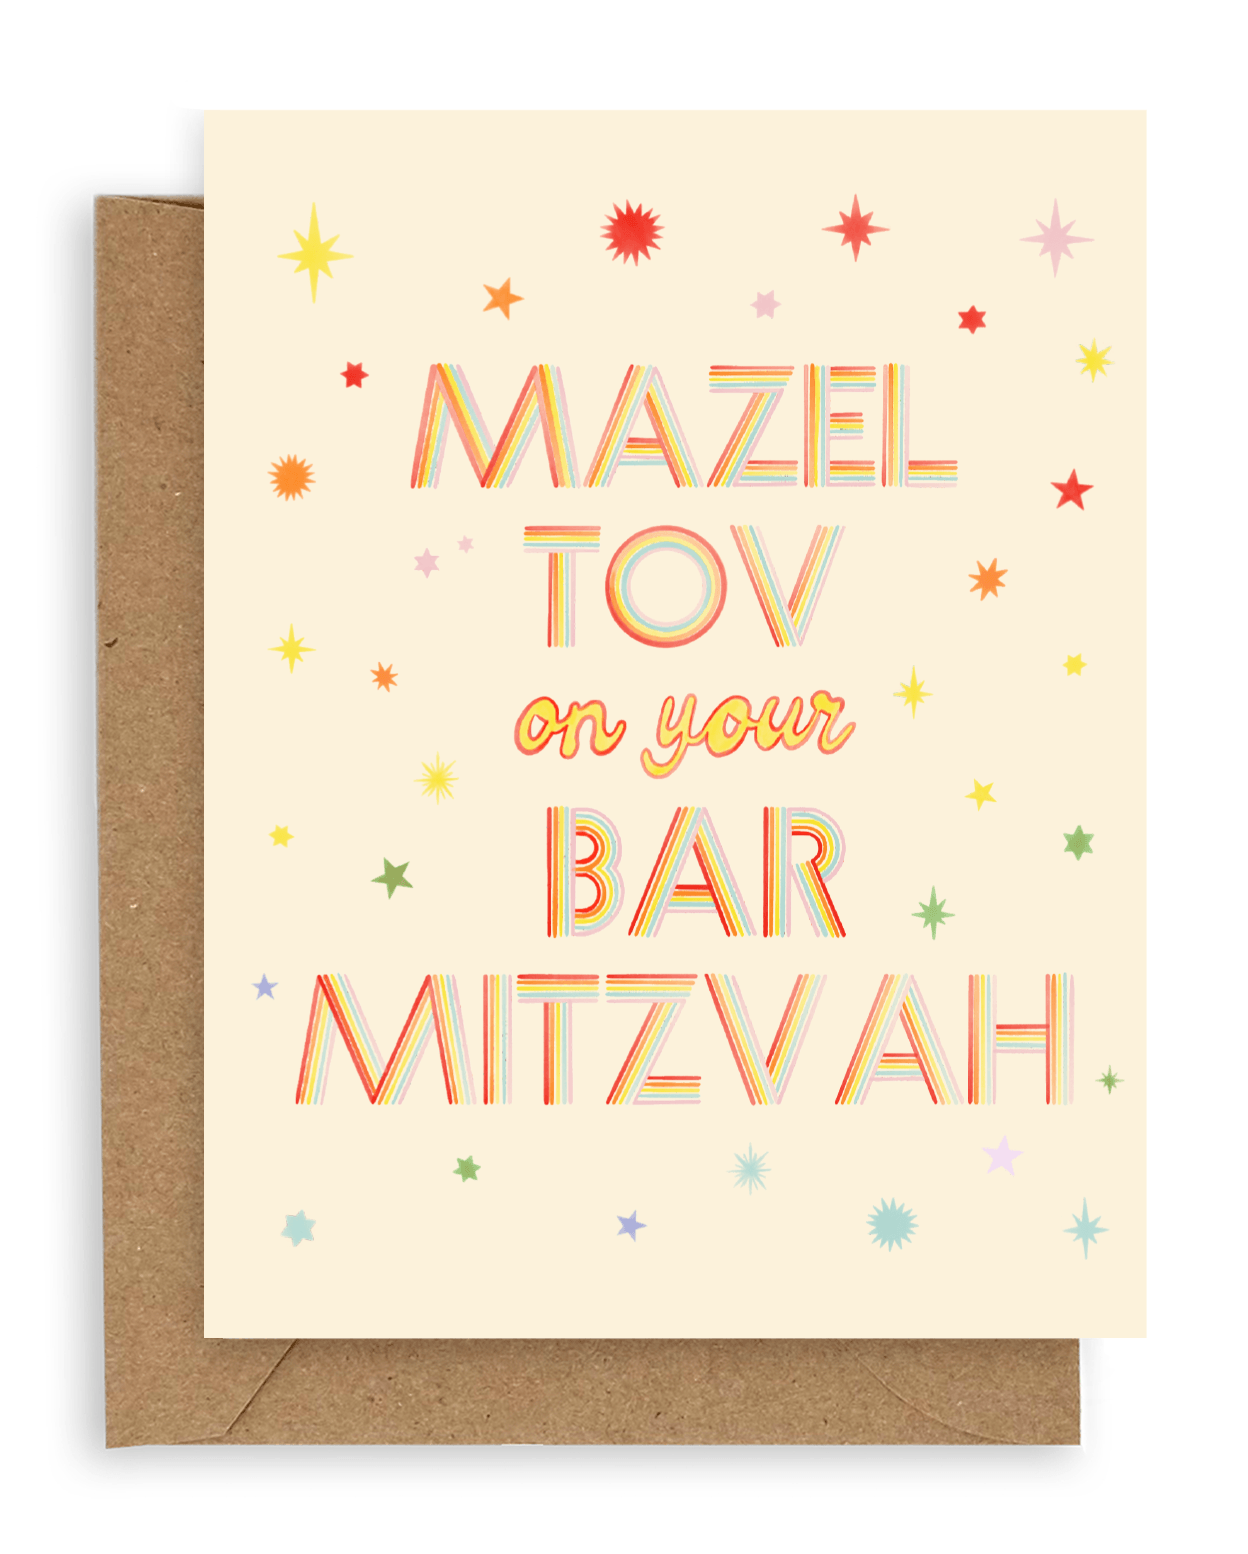 Rainbow stars surround the words "Mazel tov on your bar mitzvah" in multi-color font printed on a cream background. Shown with kraft envelope. 